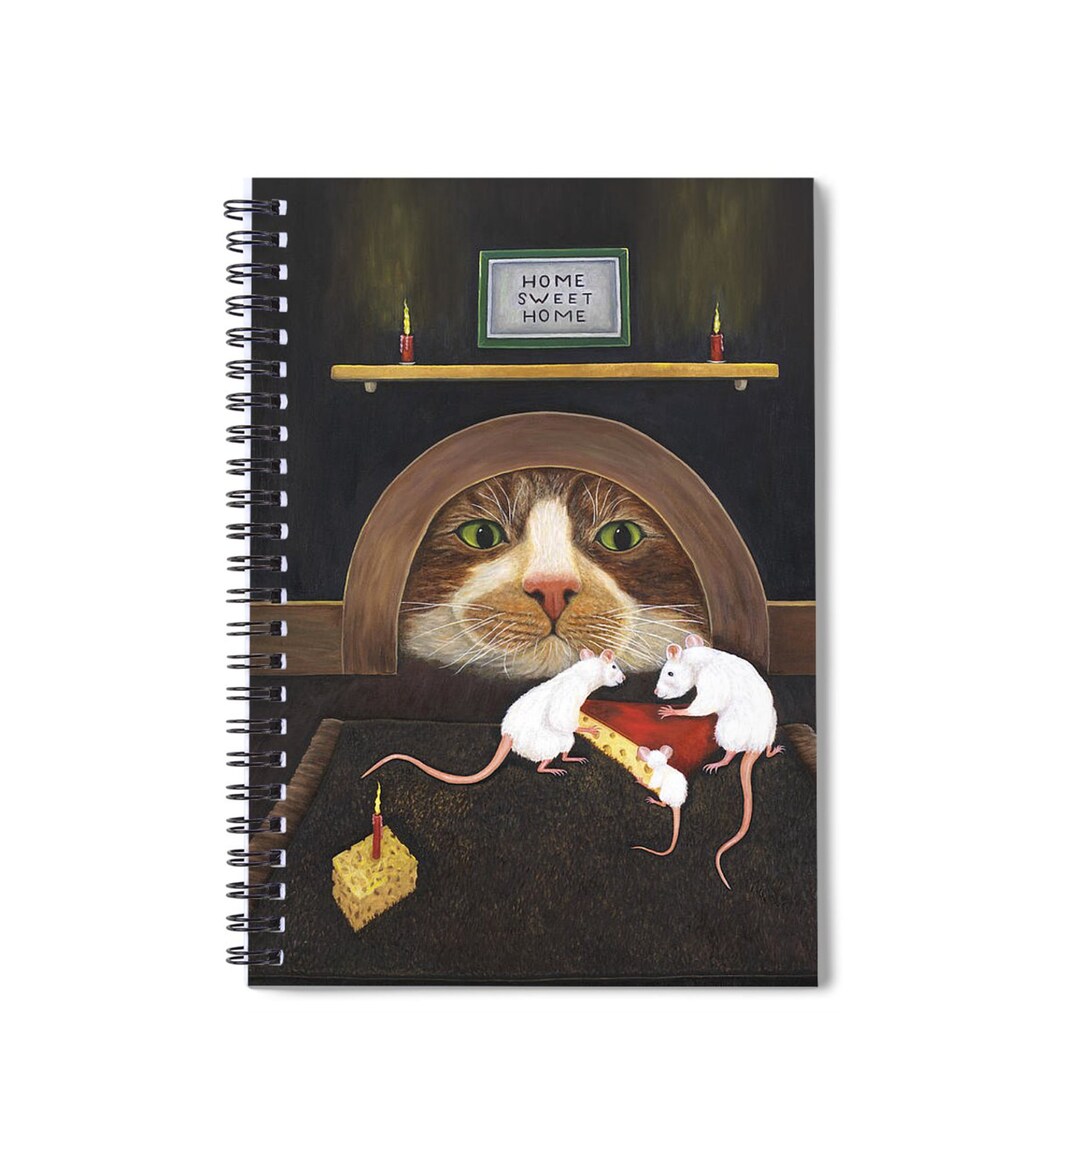 Whiskers and Wildflowers' cat large spiral bound journal